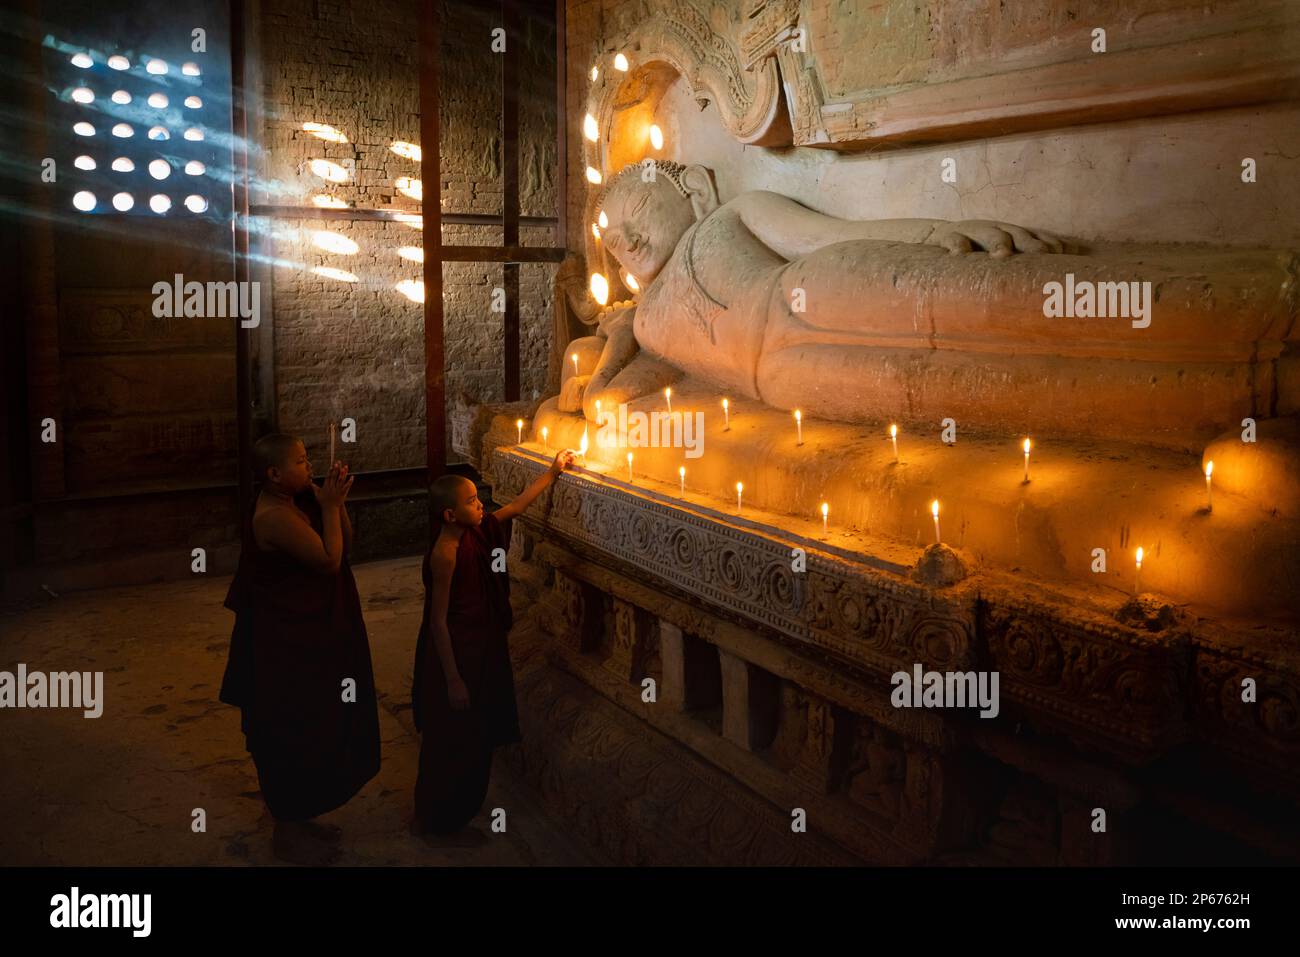 Two novice monks lighting candle by Buddhist statue inside temple, Bagan (Pagan), UNESCO World Heritage Site, Myanmar (Burma), Asia Stock Photo